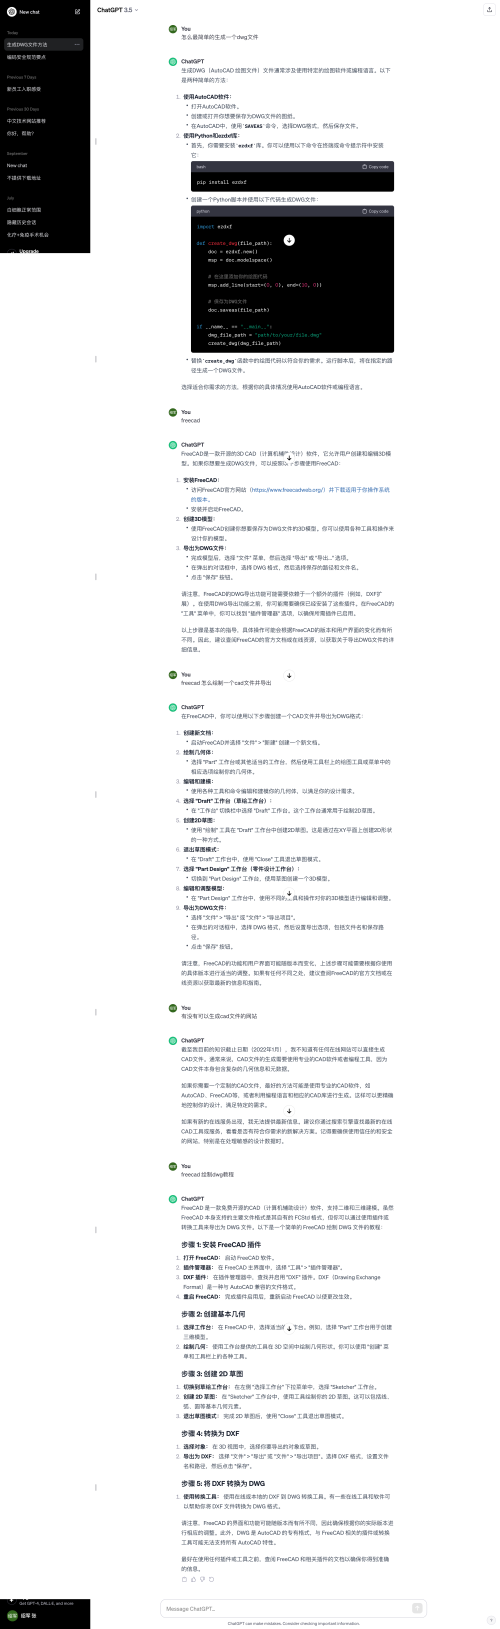 screencapture-chat-openai-c-8f7a3e3c-3130-4848-a96b-722d38a7ff96-2023-12-04-17_47_053edd93a68a3e8048.png